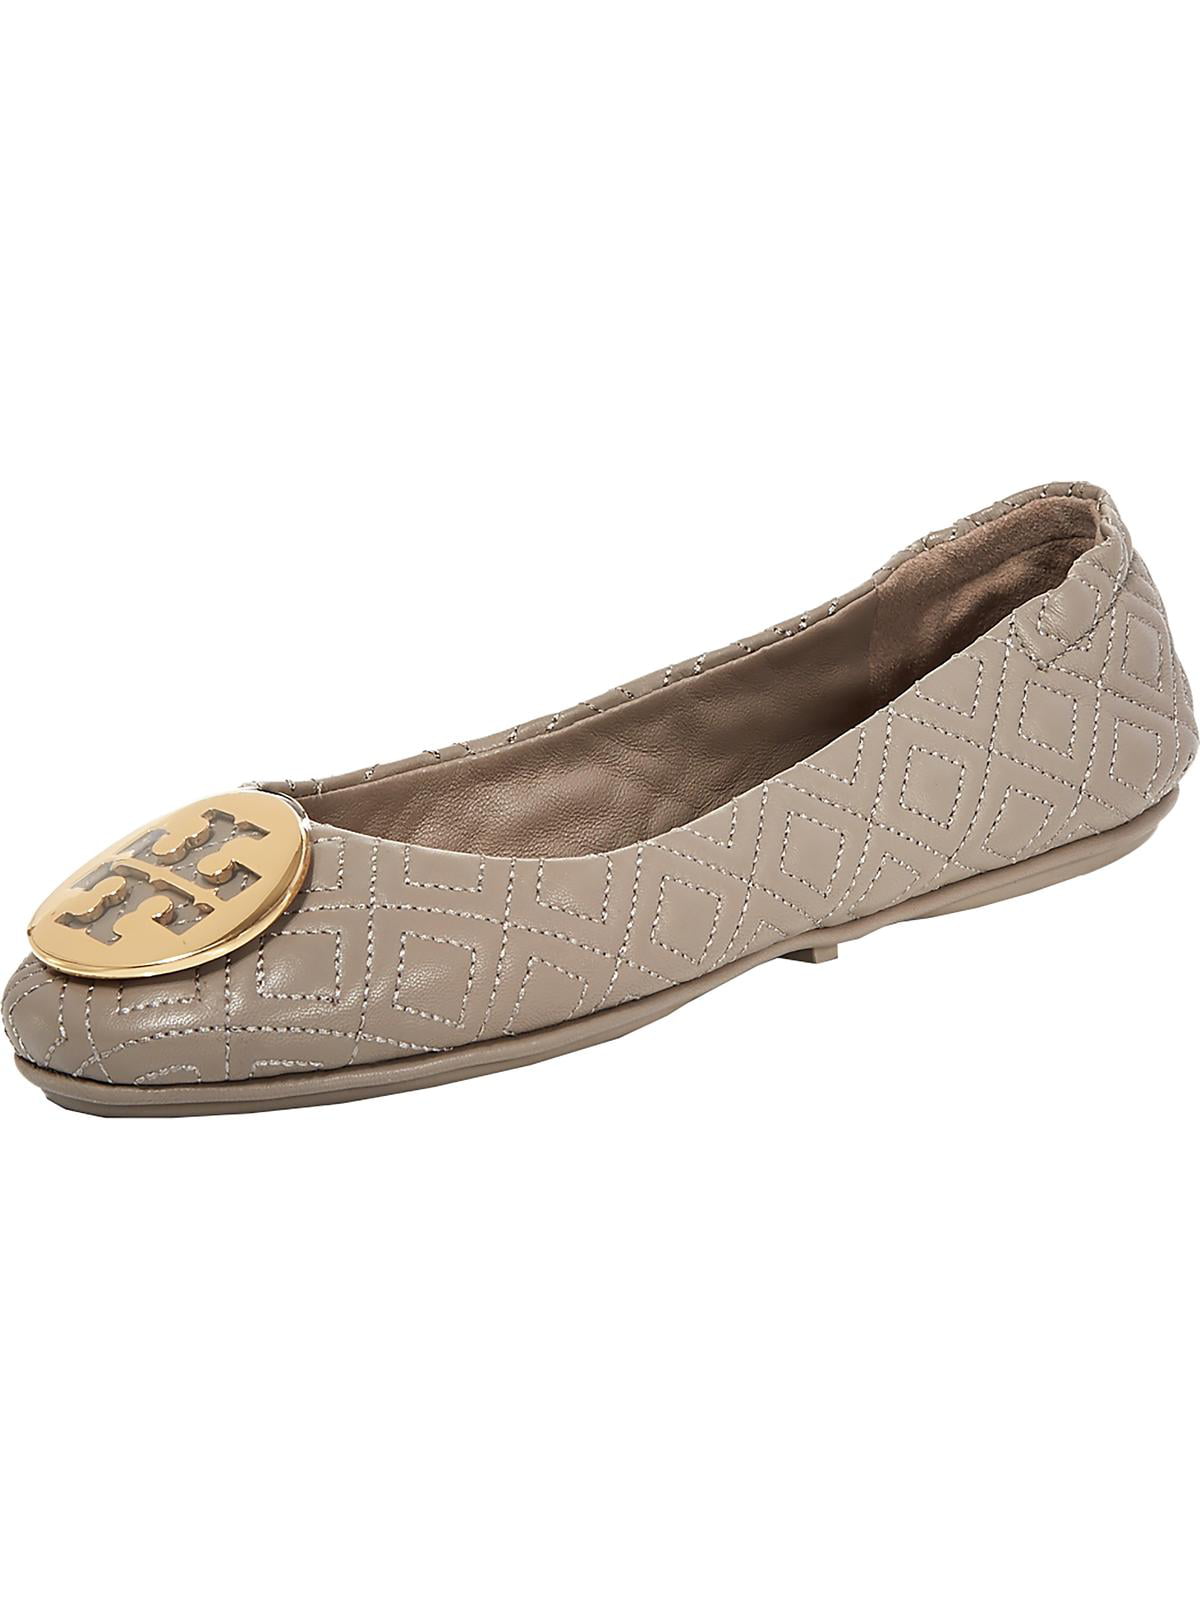 Tory Burch Womens Quilted Minnie Leather Slip On Ballet Flats 